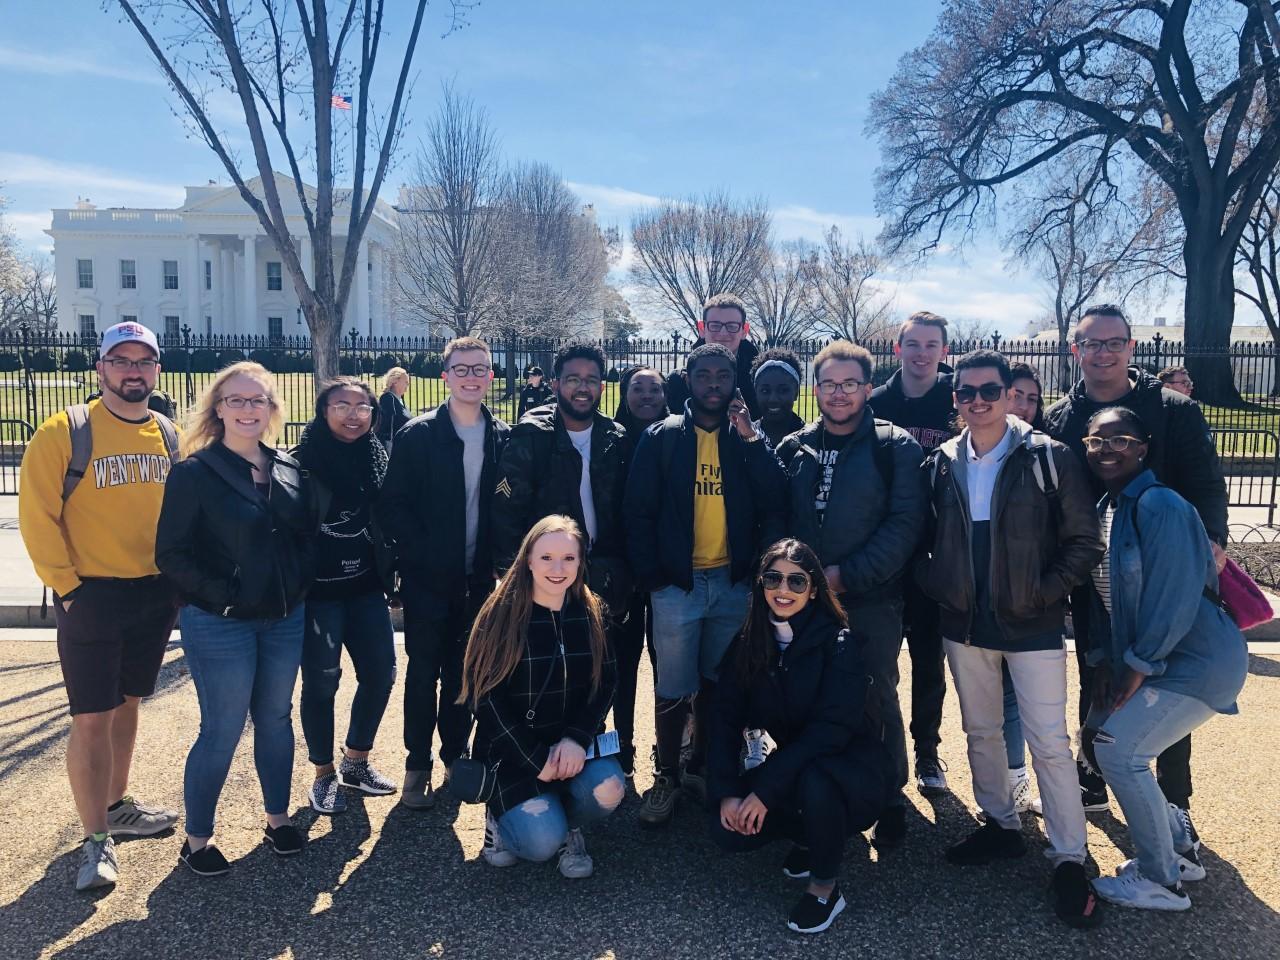 Students in front of the White House